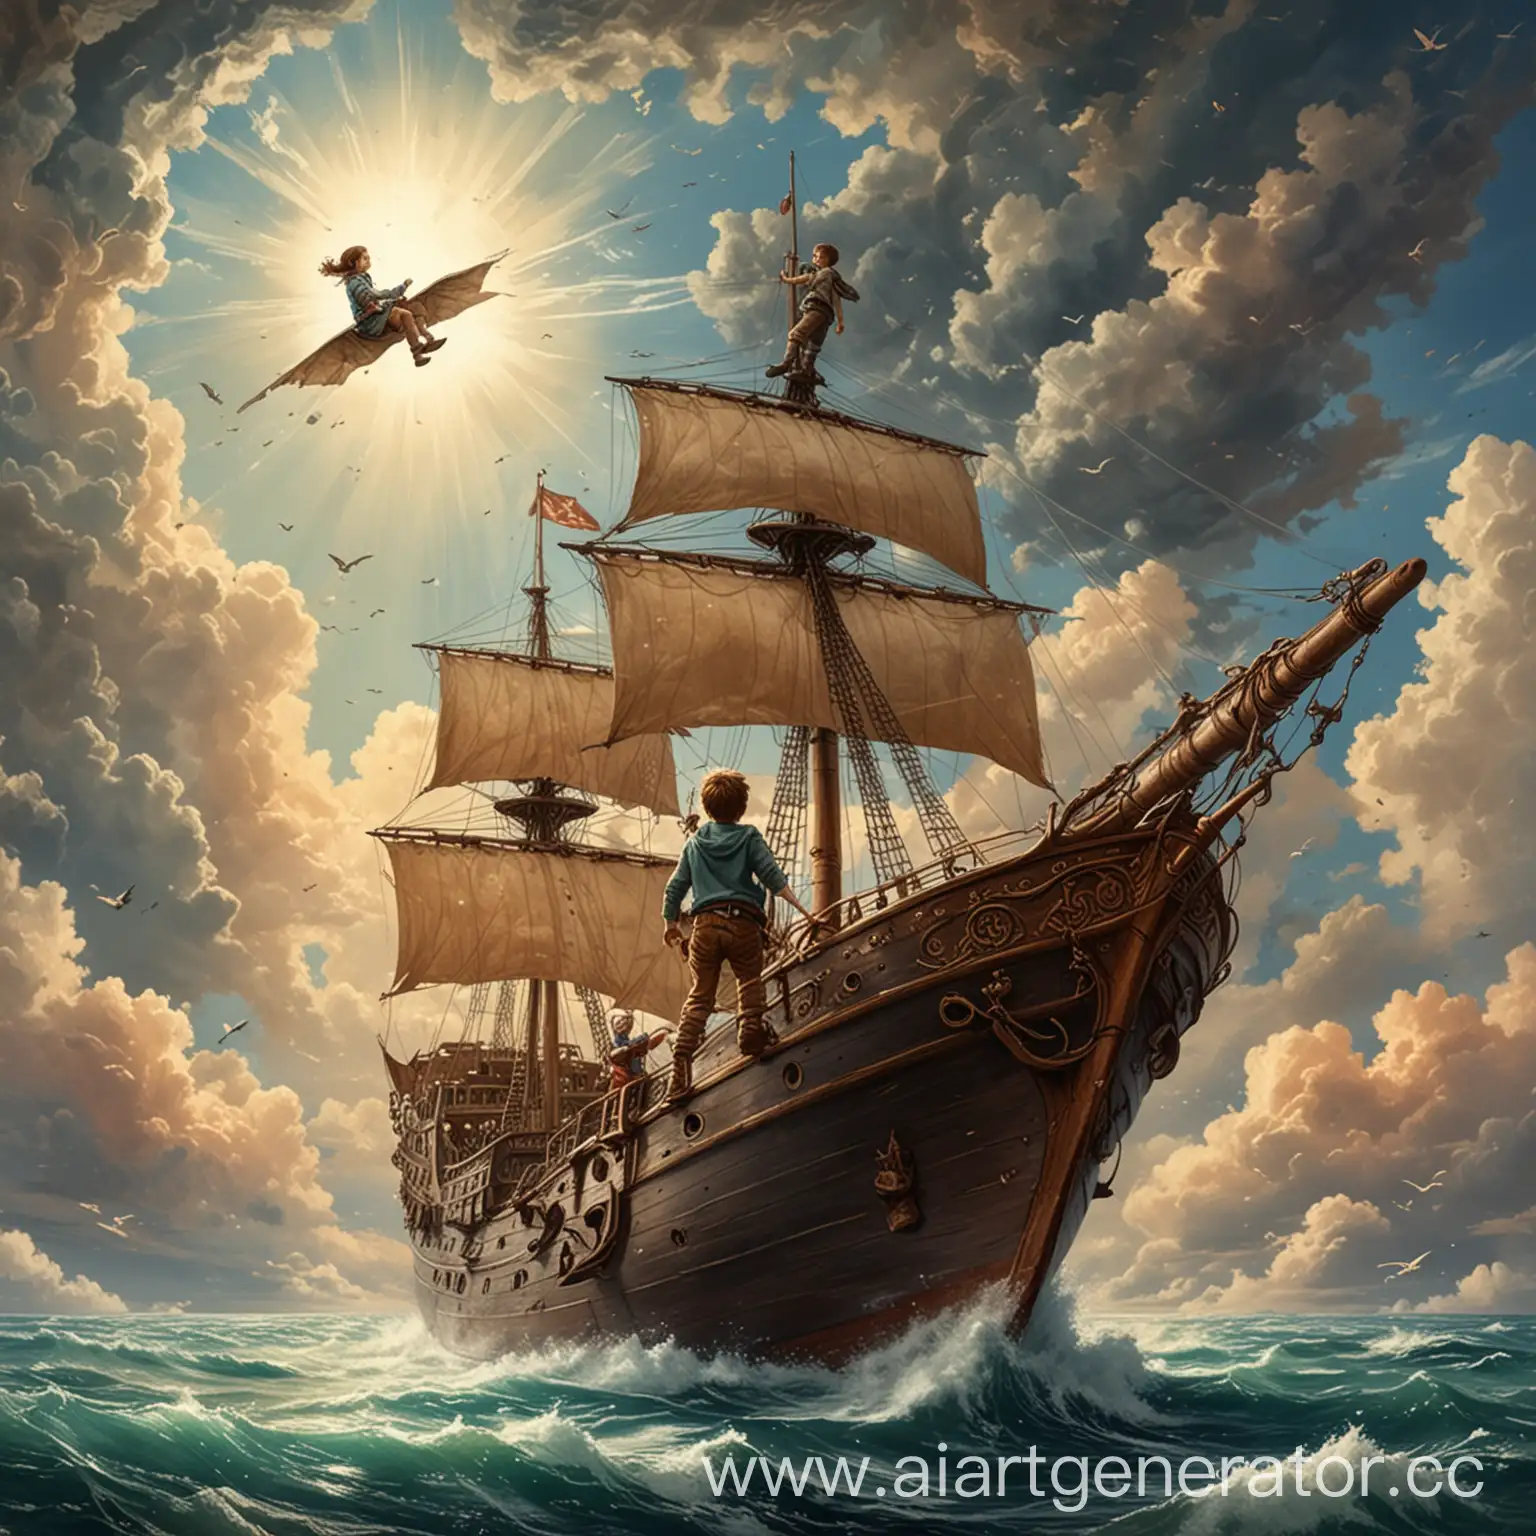 Adventure-of-a-Boy-Flying-to-Meet-a-Girl-on-a-Ship-in-the-Sky-Artistic-Illustration